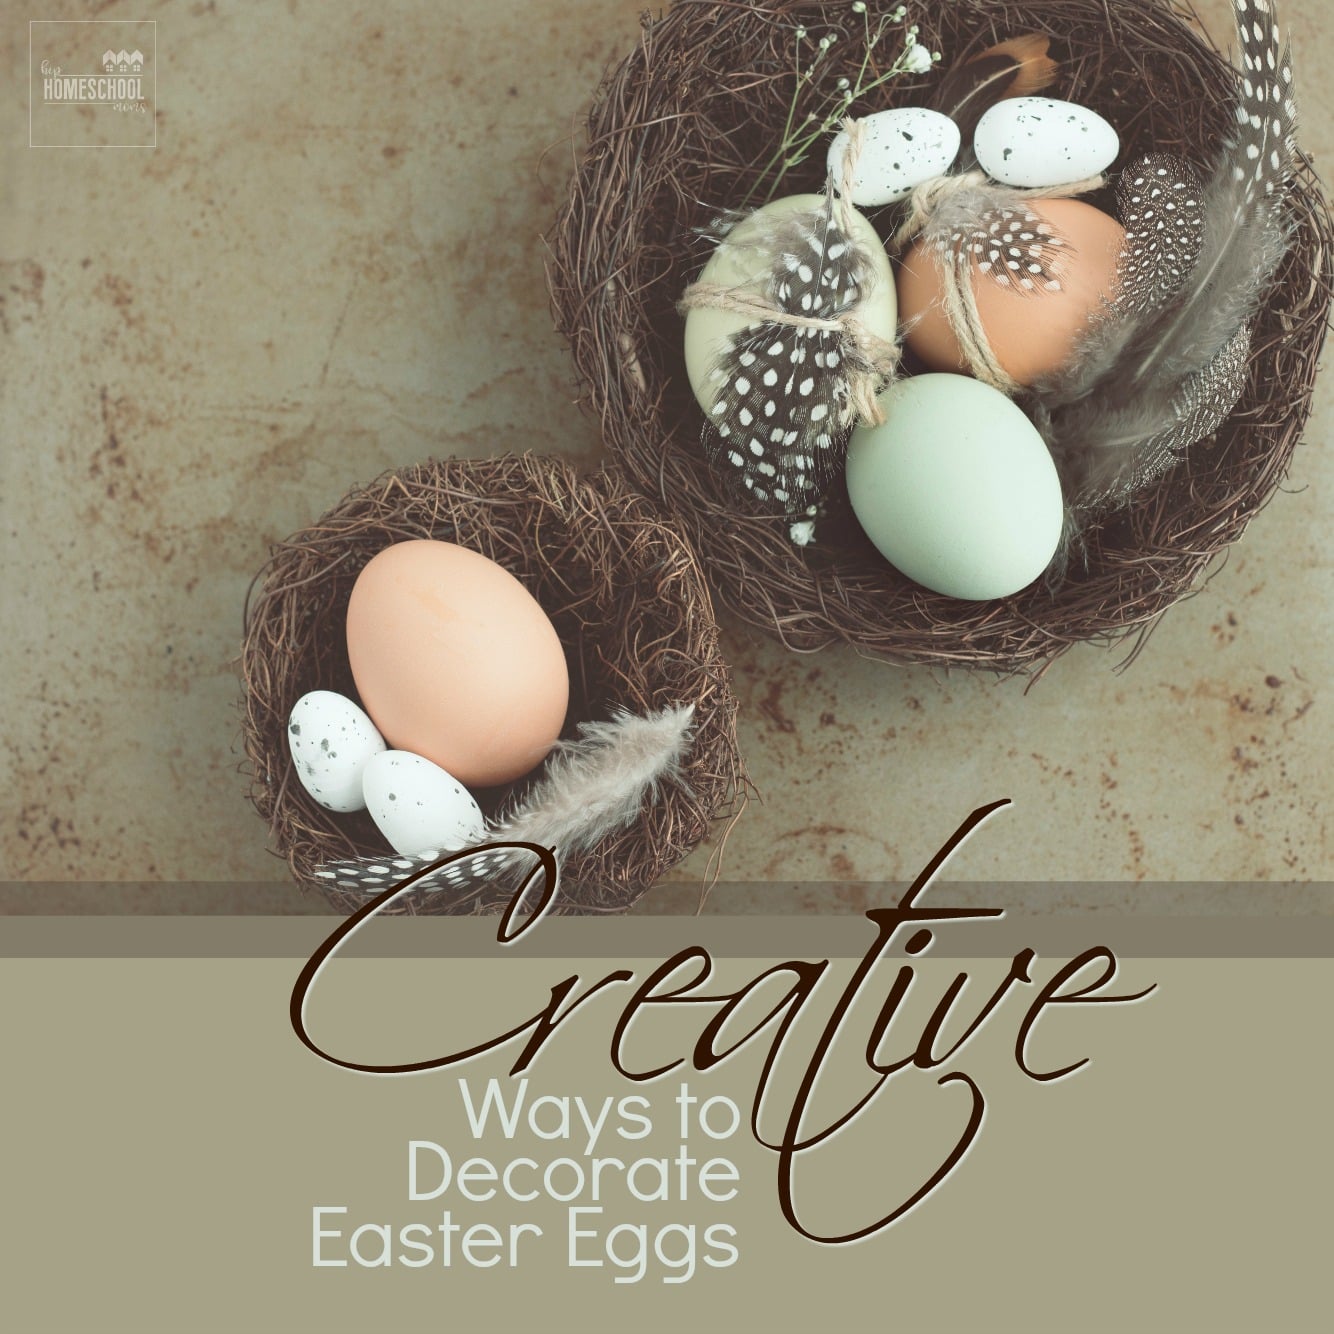 Creative Ways to Decorate Easter Eggs